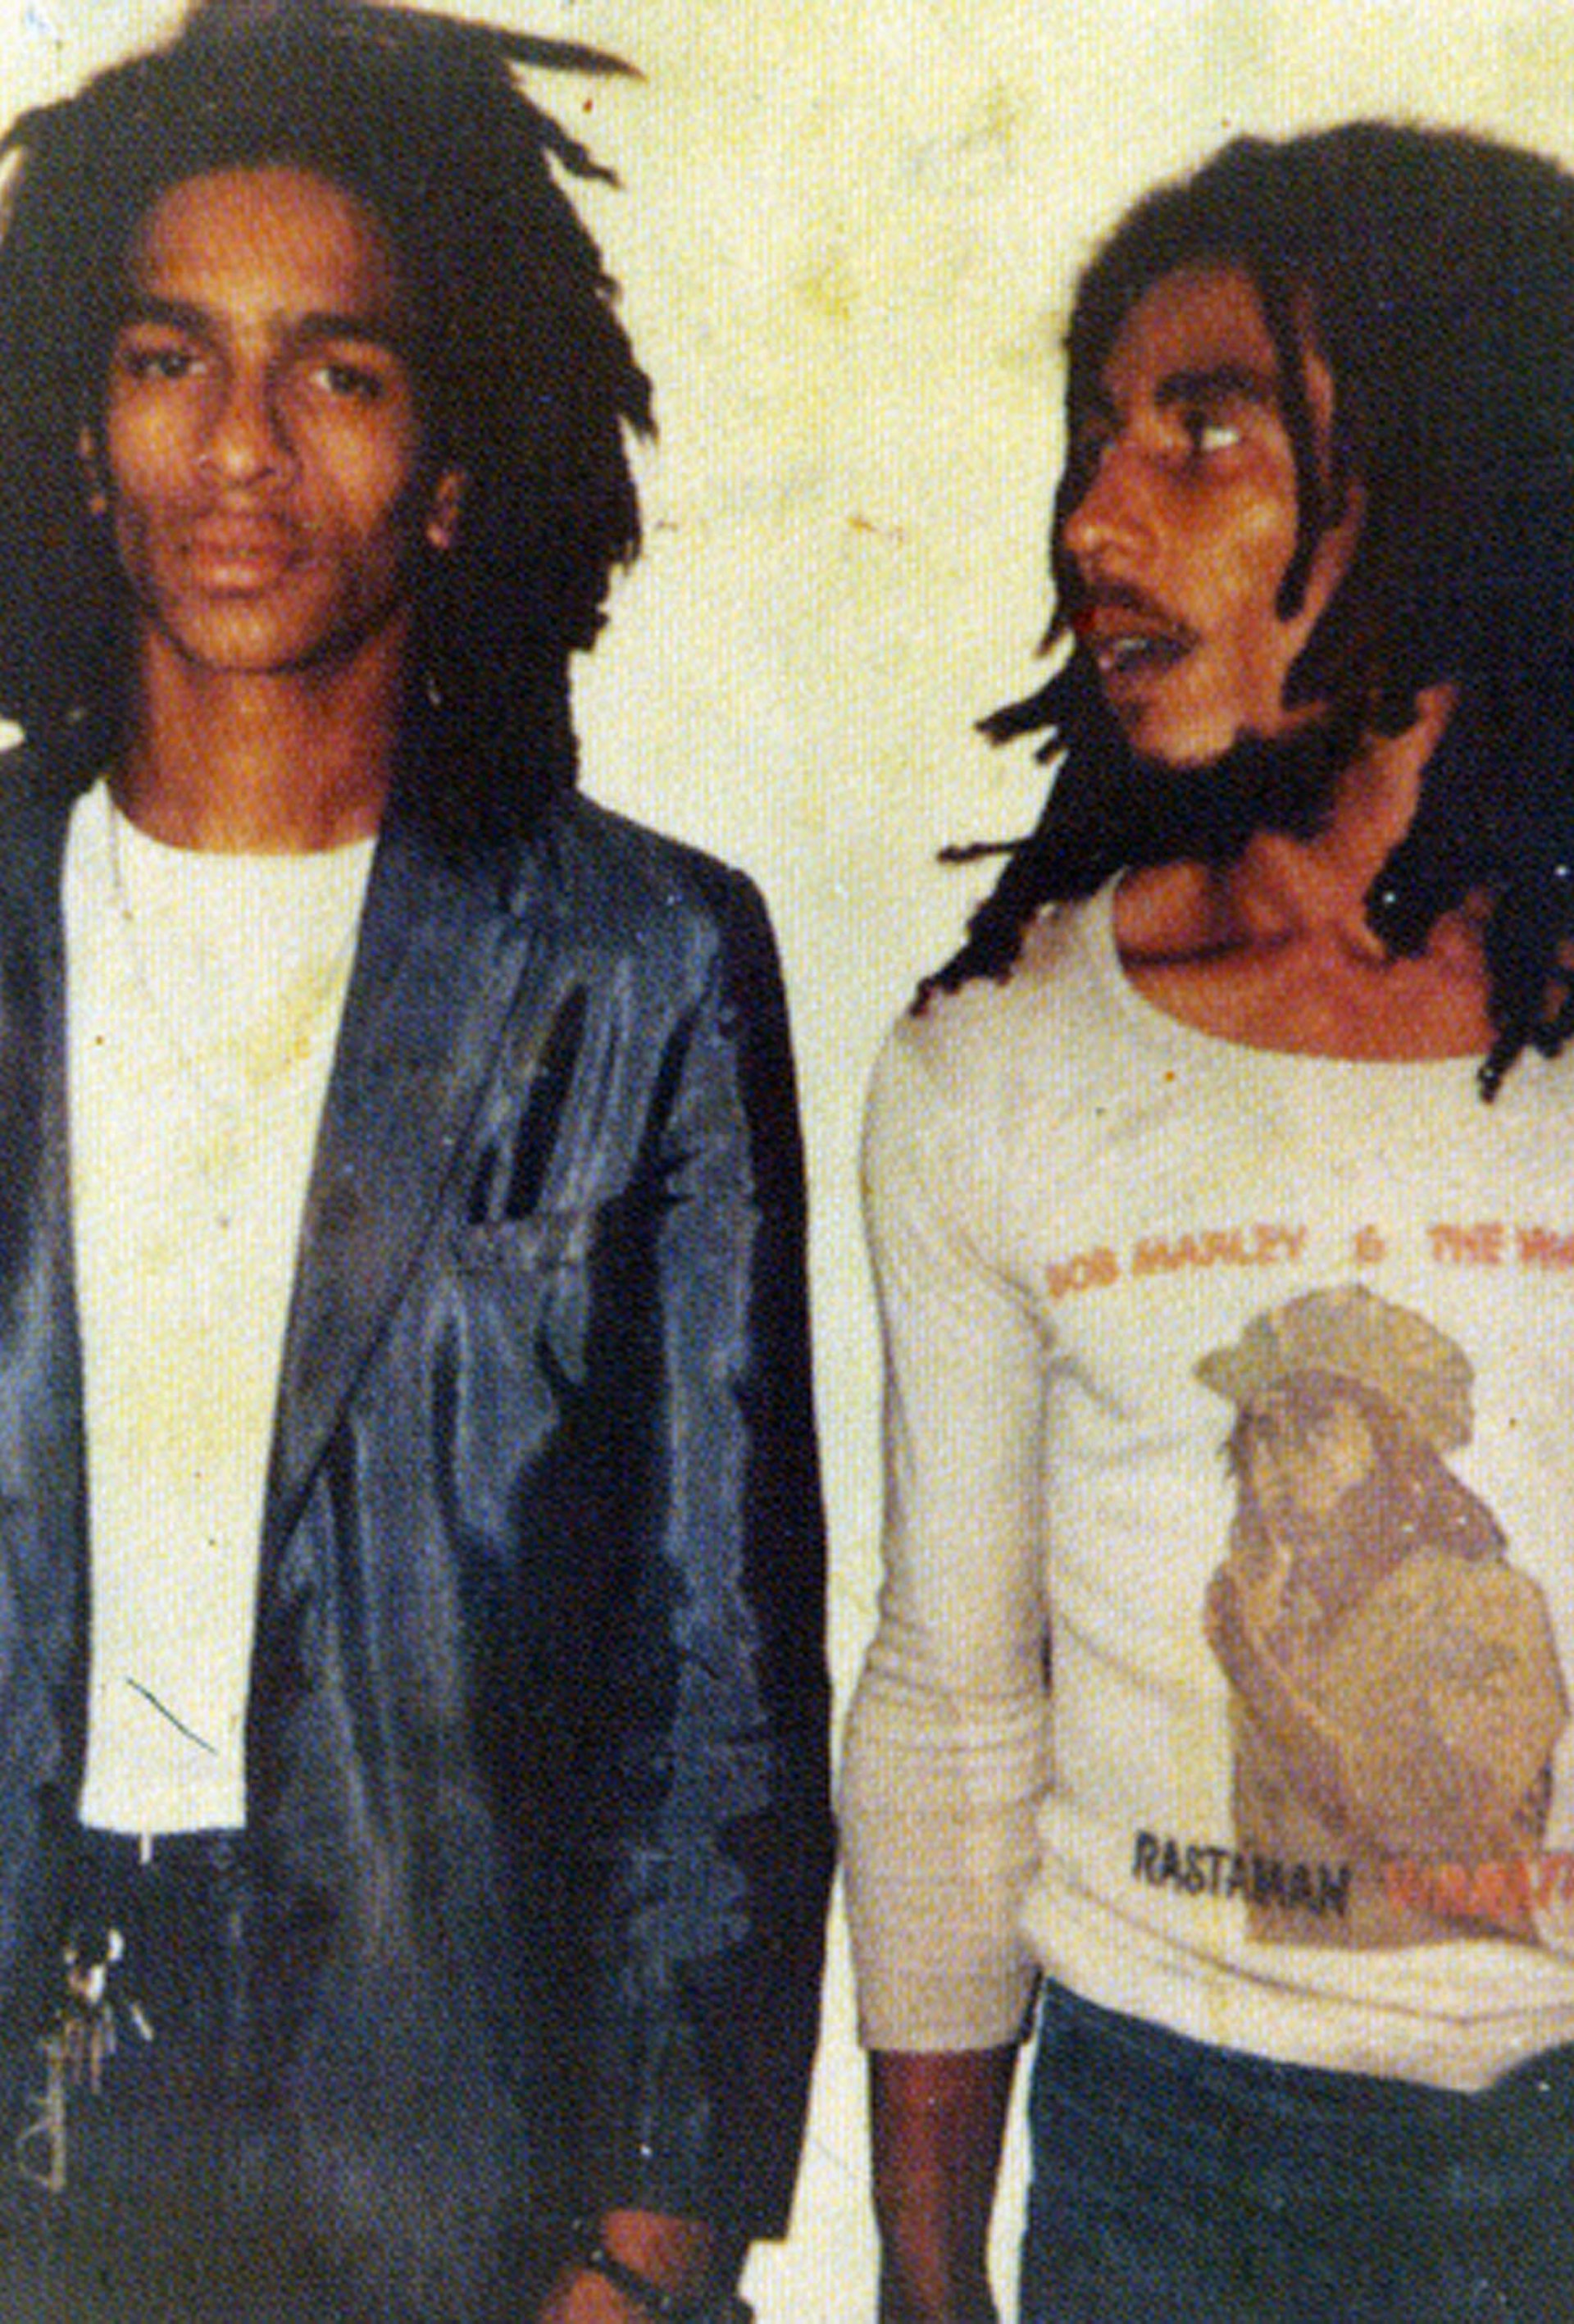 Don Letts and Bob Marley.